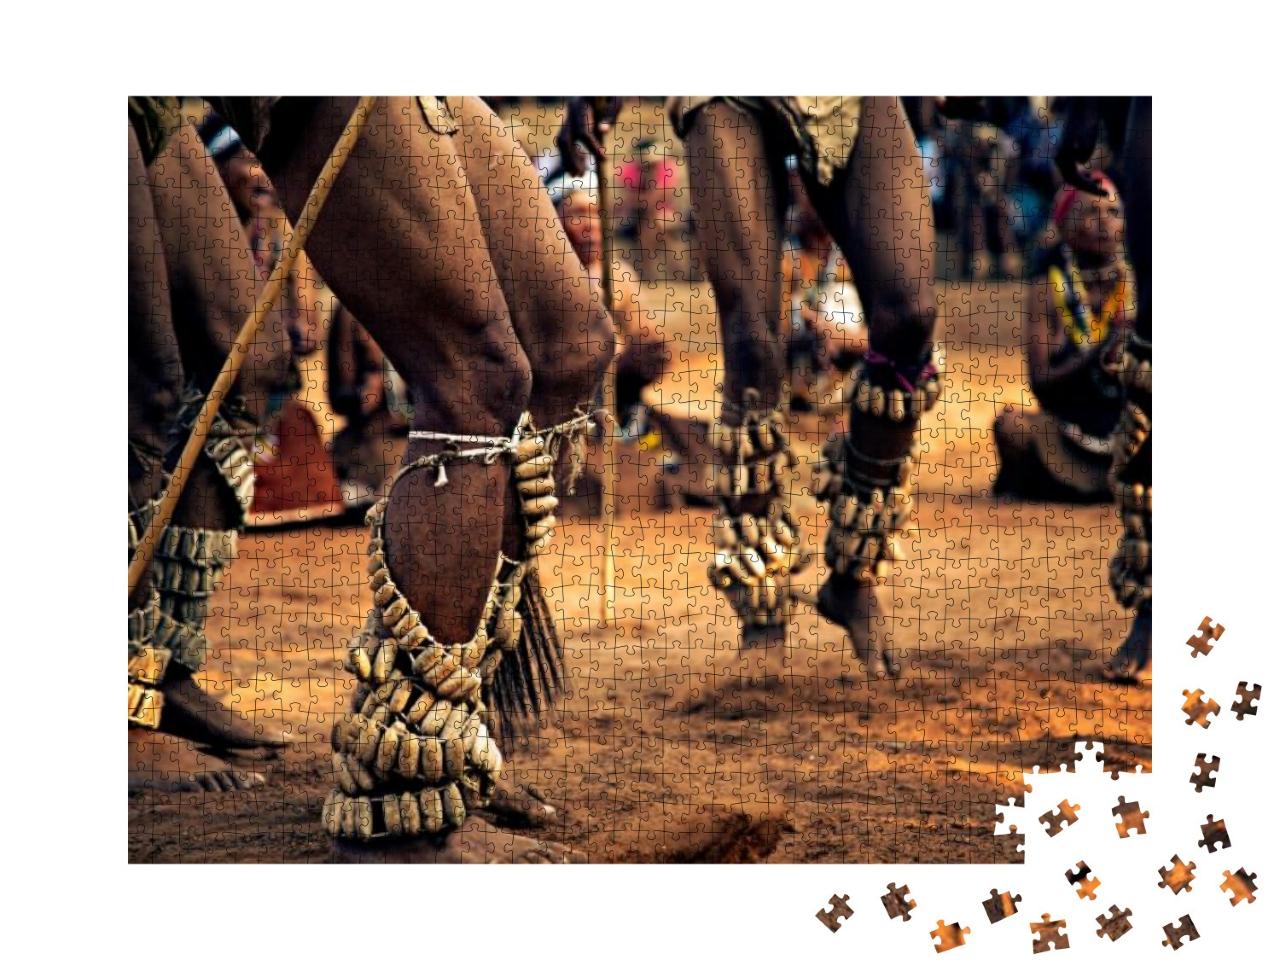 The Photo Was Taken During the Kuru Dance Festival in Bot... Jigsaw Puzzle with 1000 pieces